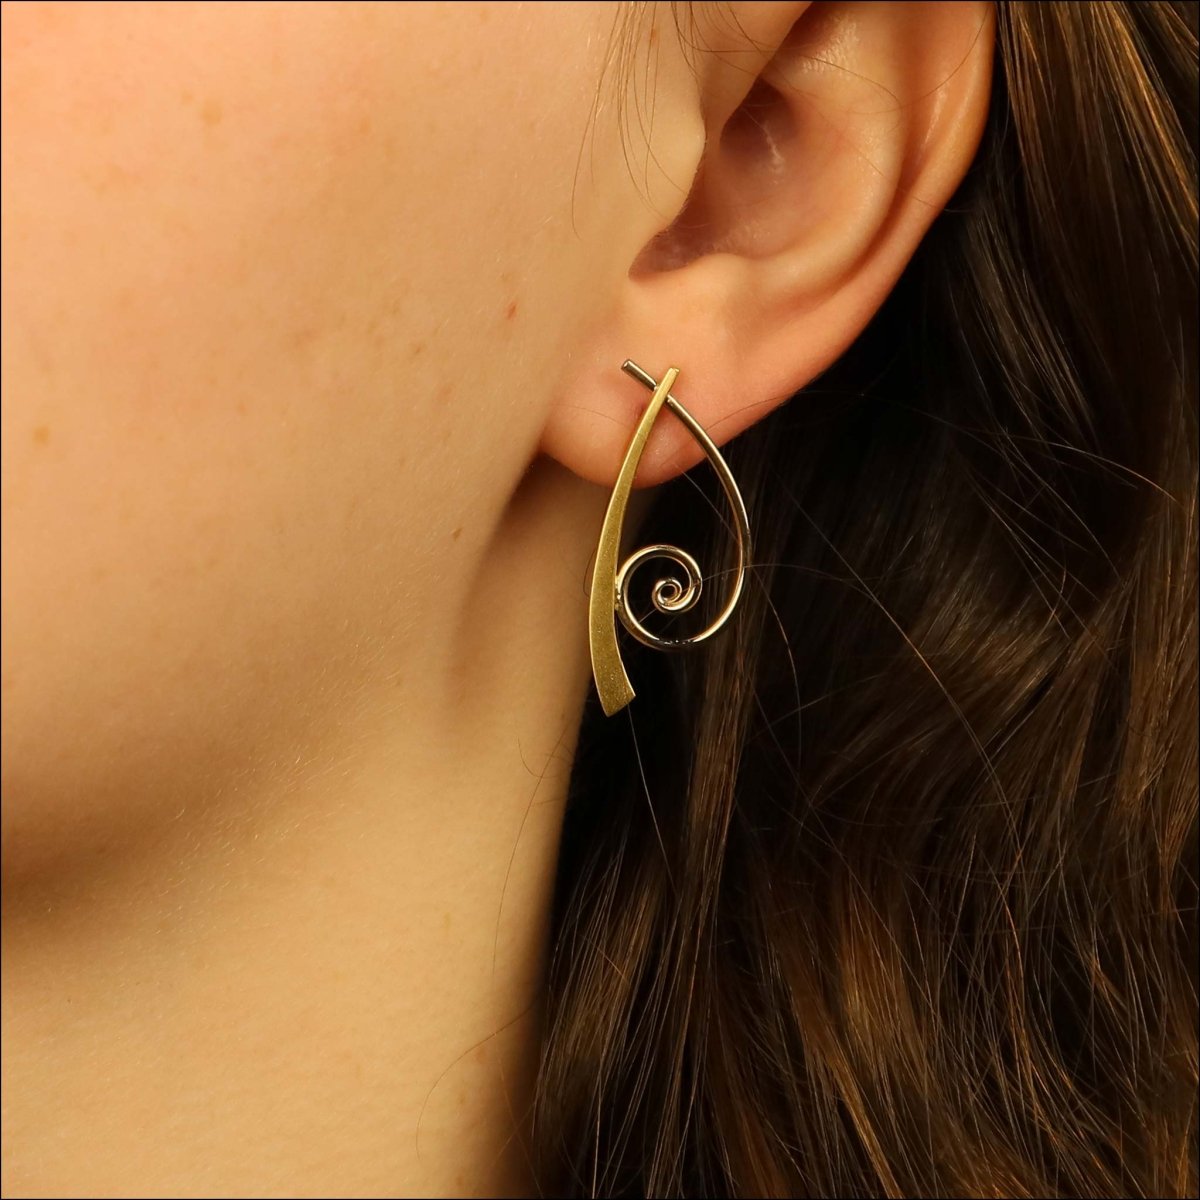 Two Tone Forged Spiral Earrings 14KW 18KY - JewelsmithEarrings